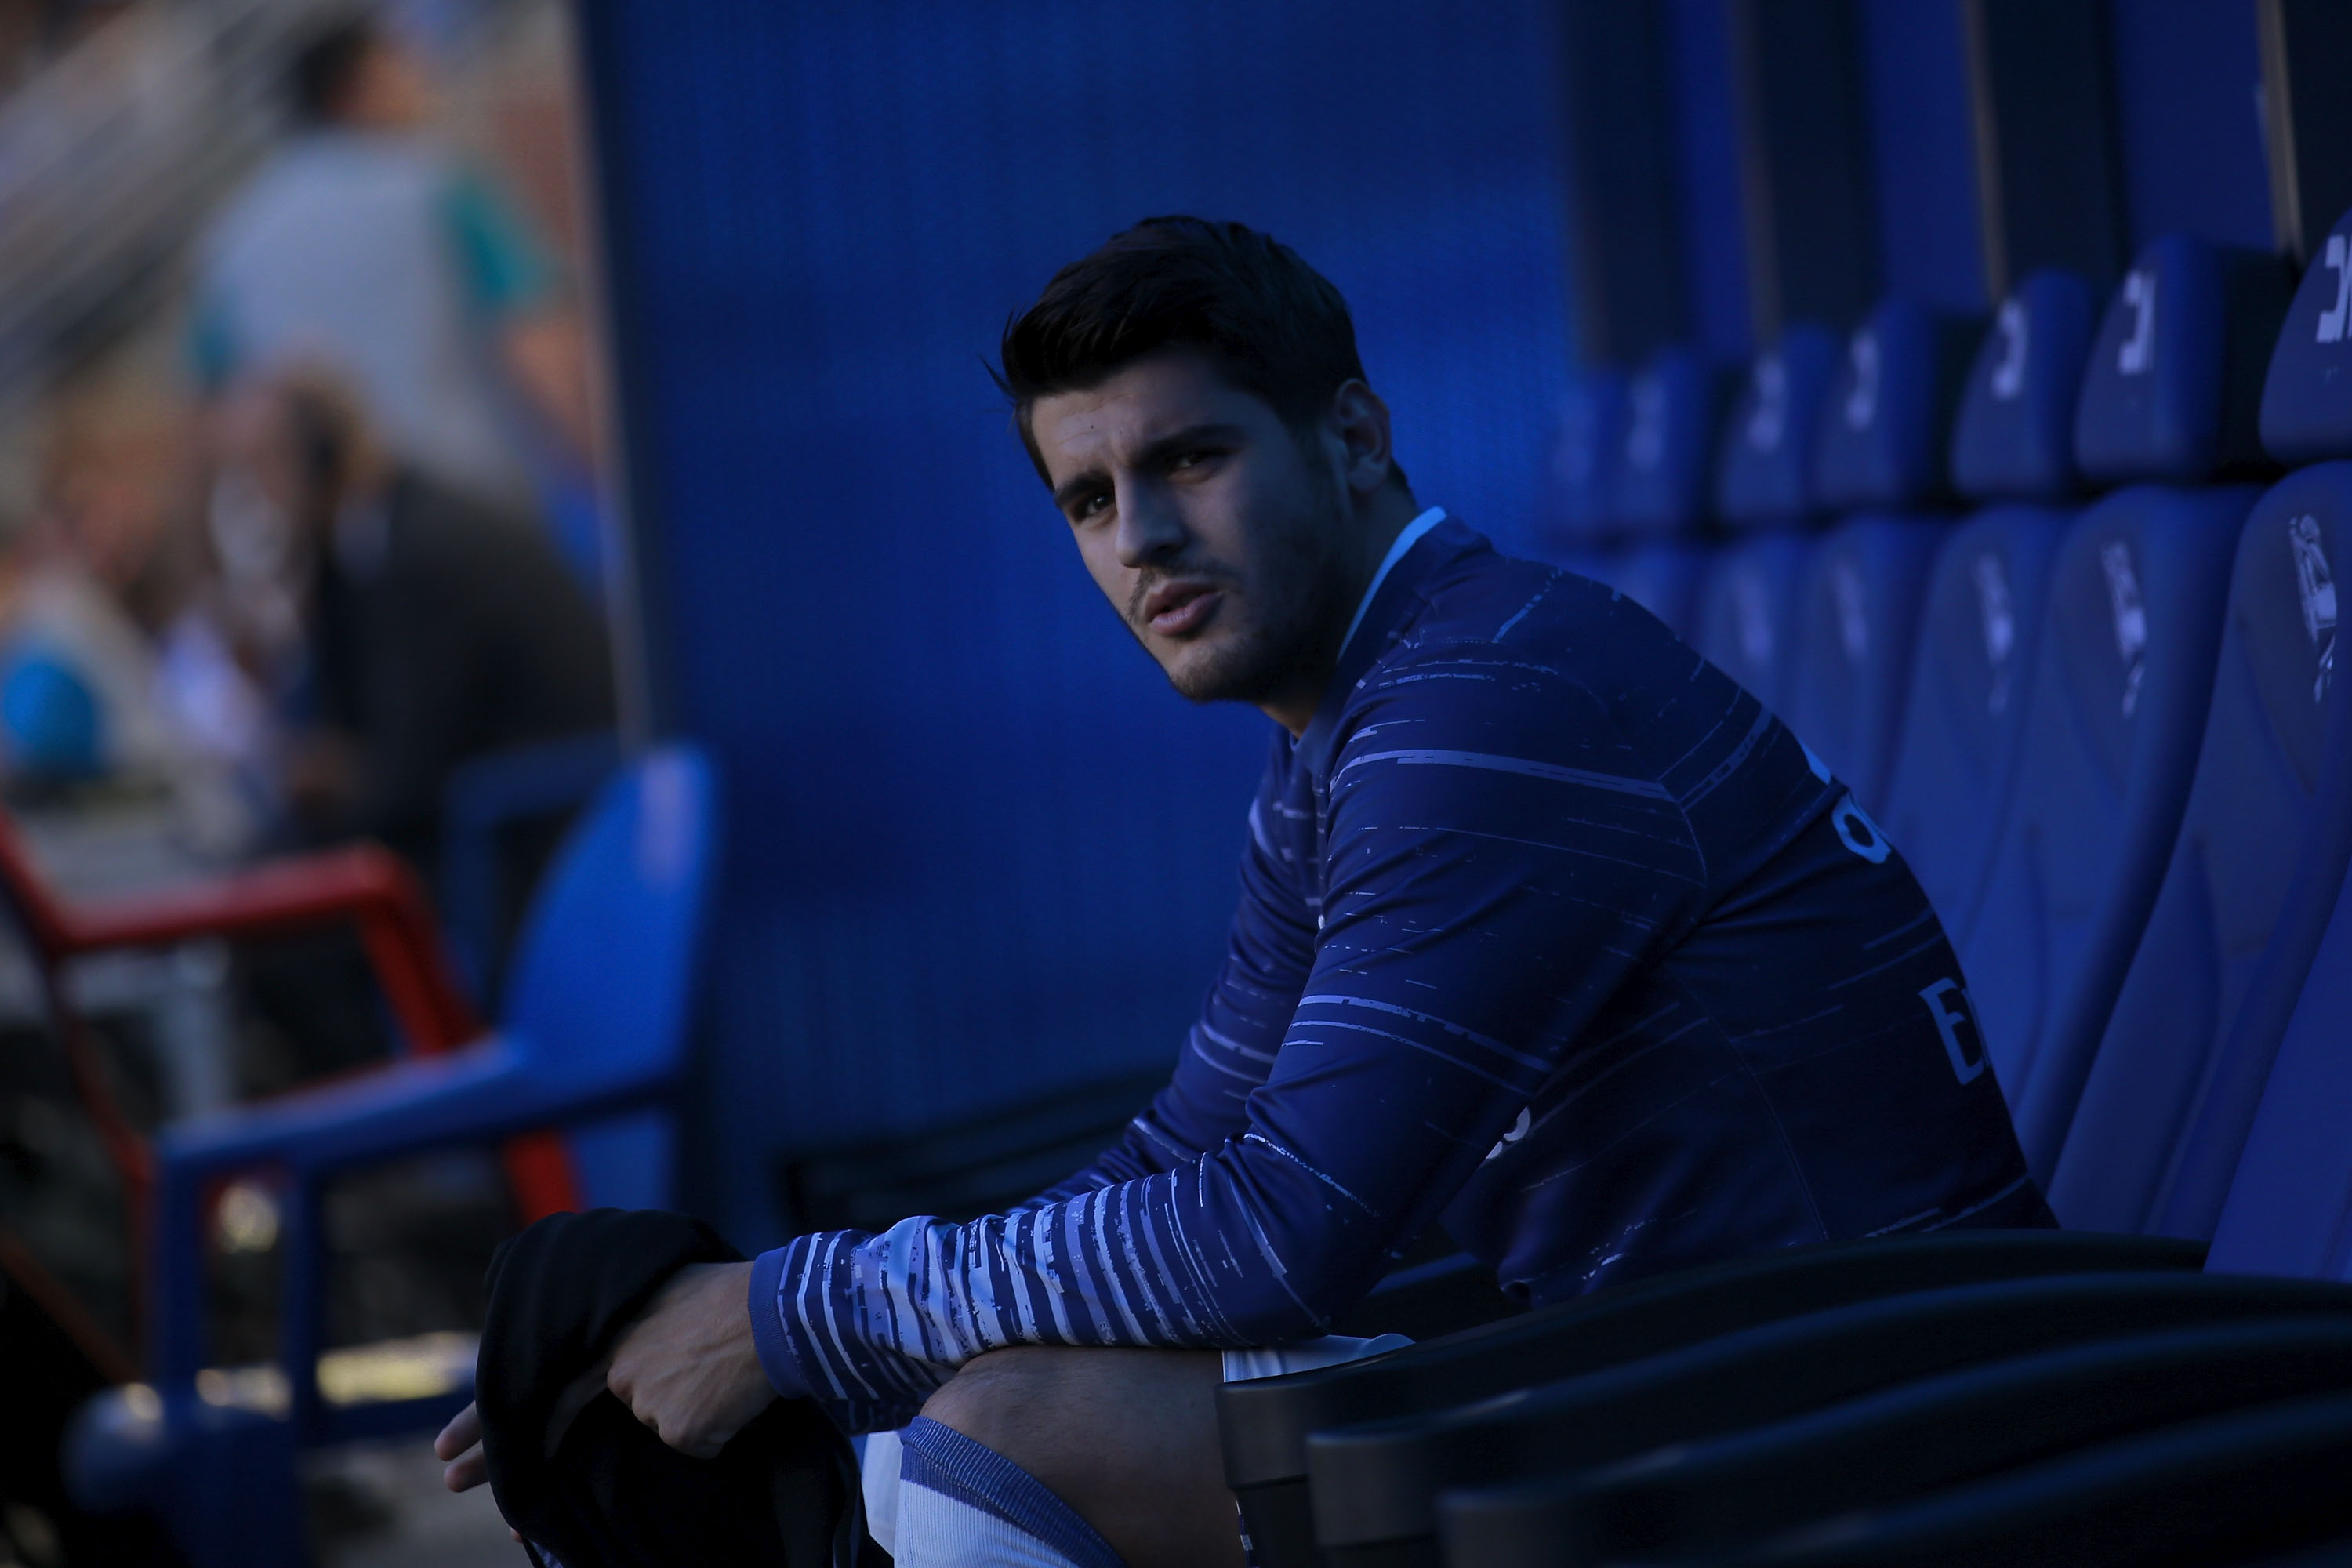 Alvaro Morata has grown frustrated with warming the benches at Real Madrid. (Photo courtesy - Gonzalo Arroyo Moreno/Getty Images)